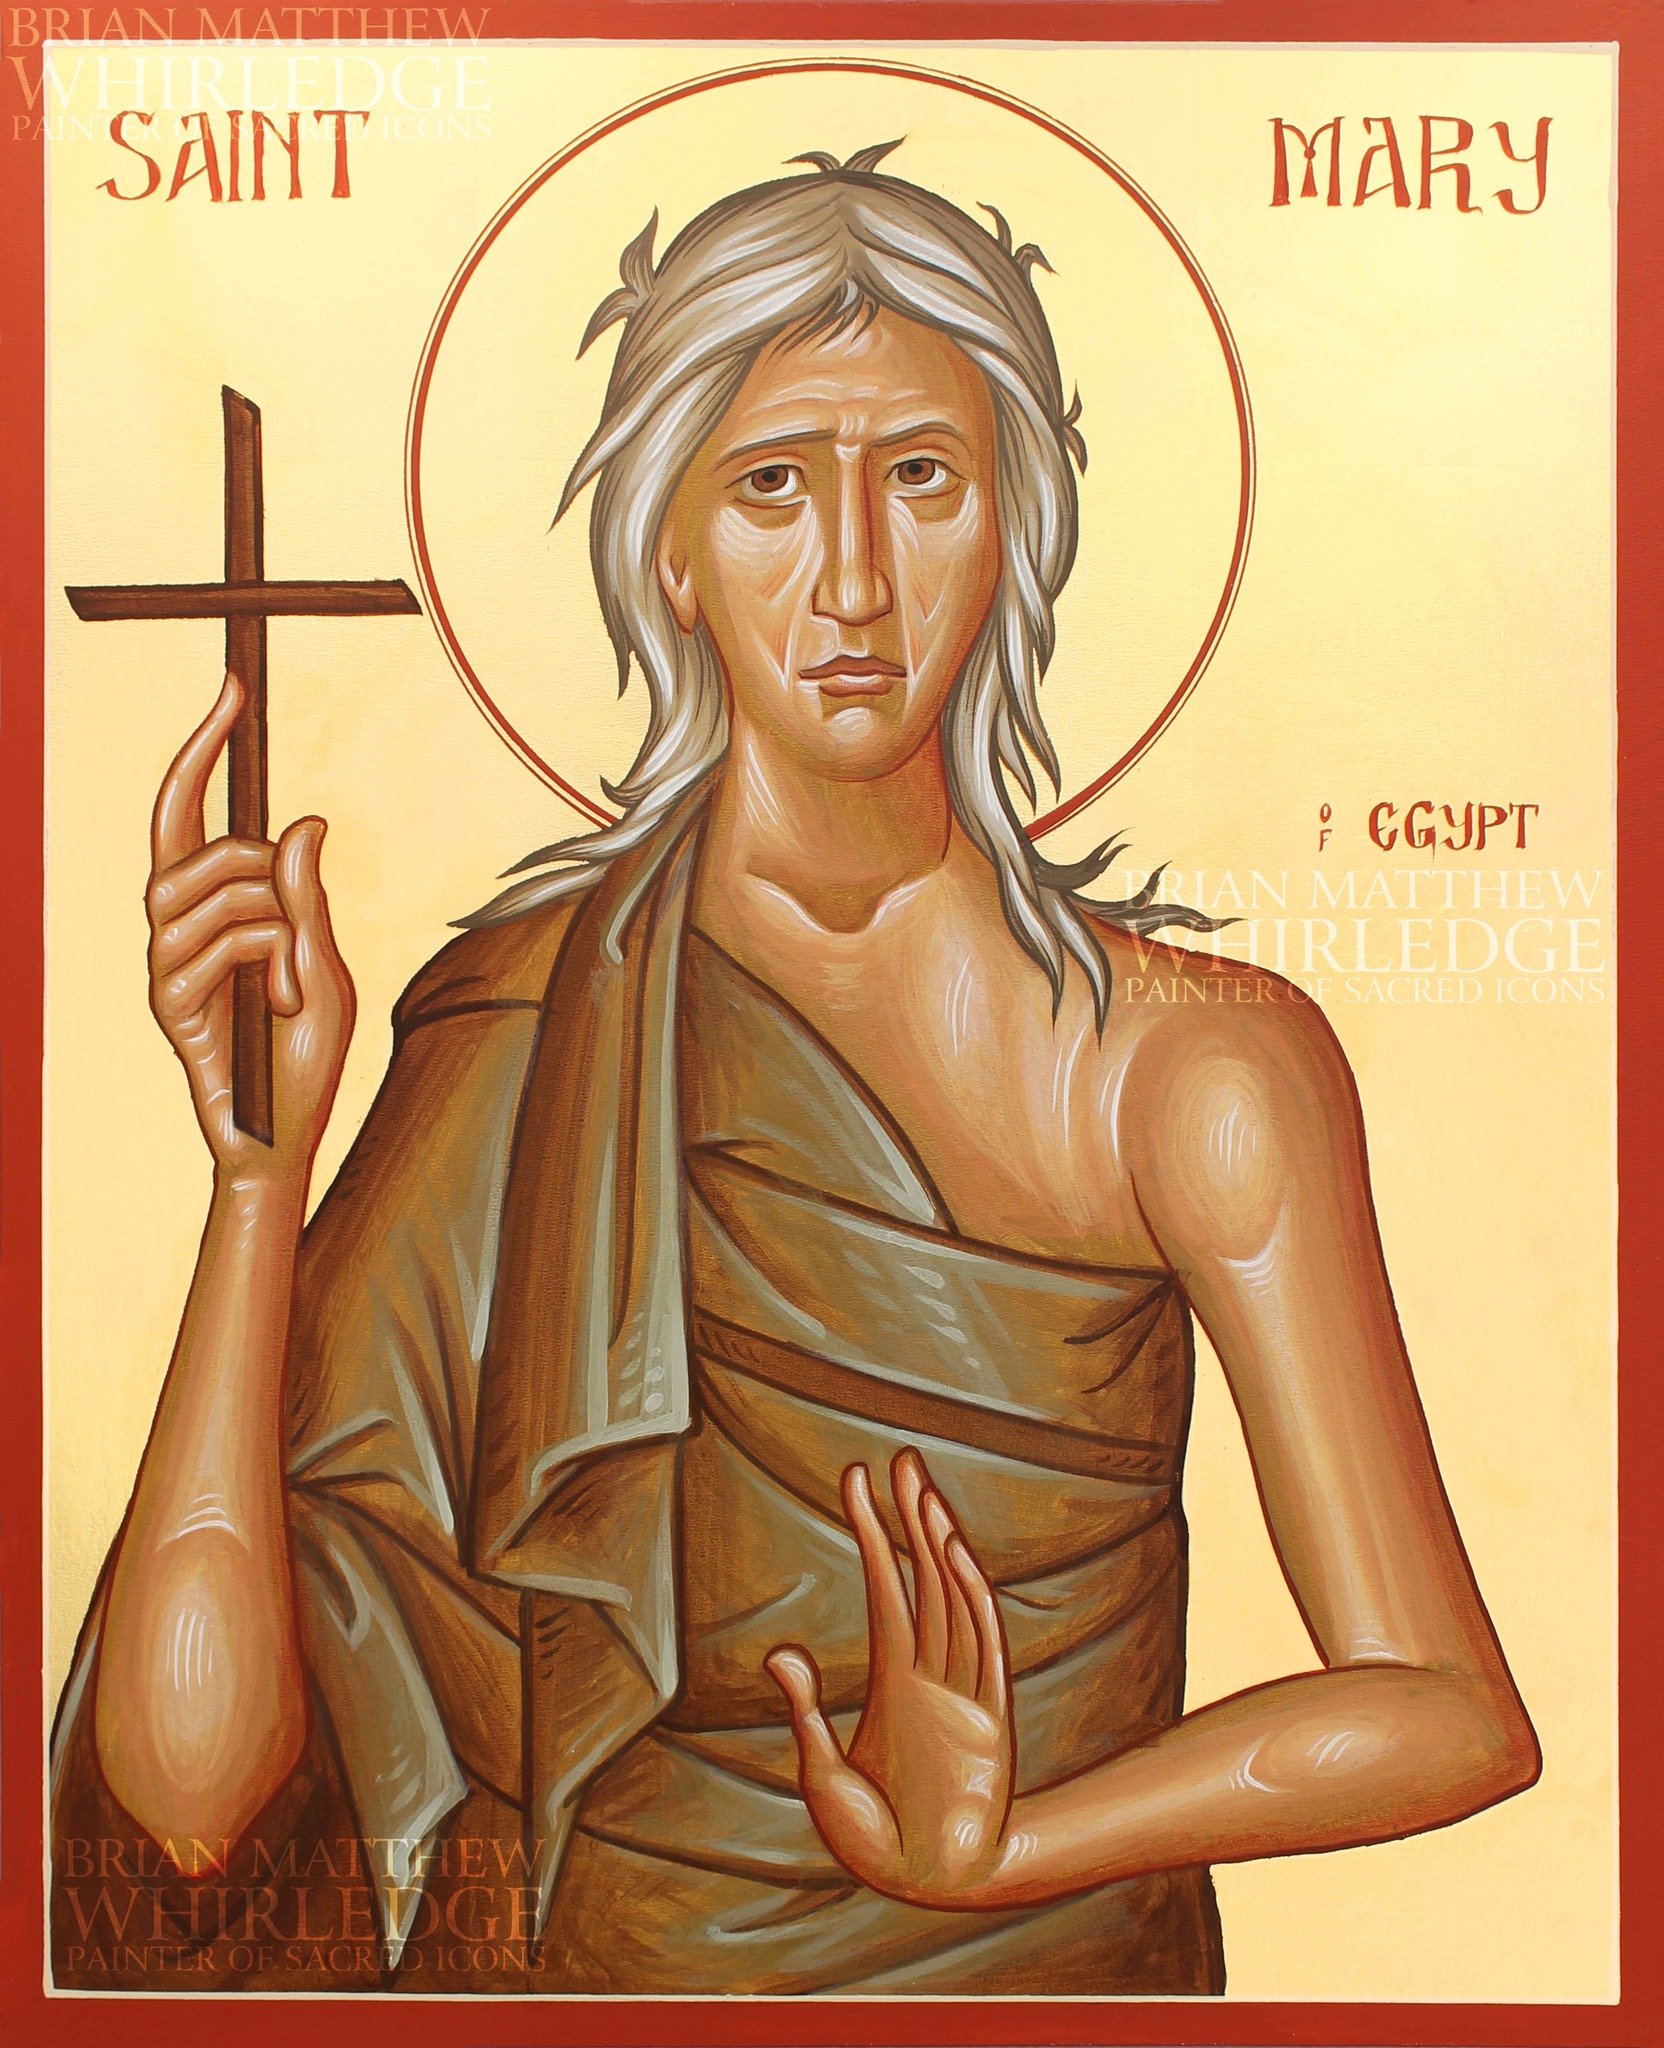 Saint Mary of Egypt (+522) is the great model of repentance. She was a great ascetic who repented of her former sinful life to live in the harsh Jordanian desert for 47 years.
.
In you, O Mother, was preserved with exactness what was according to the